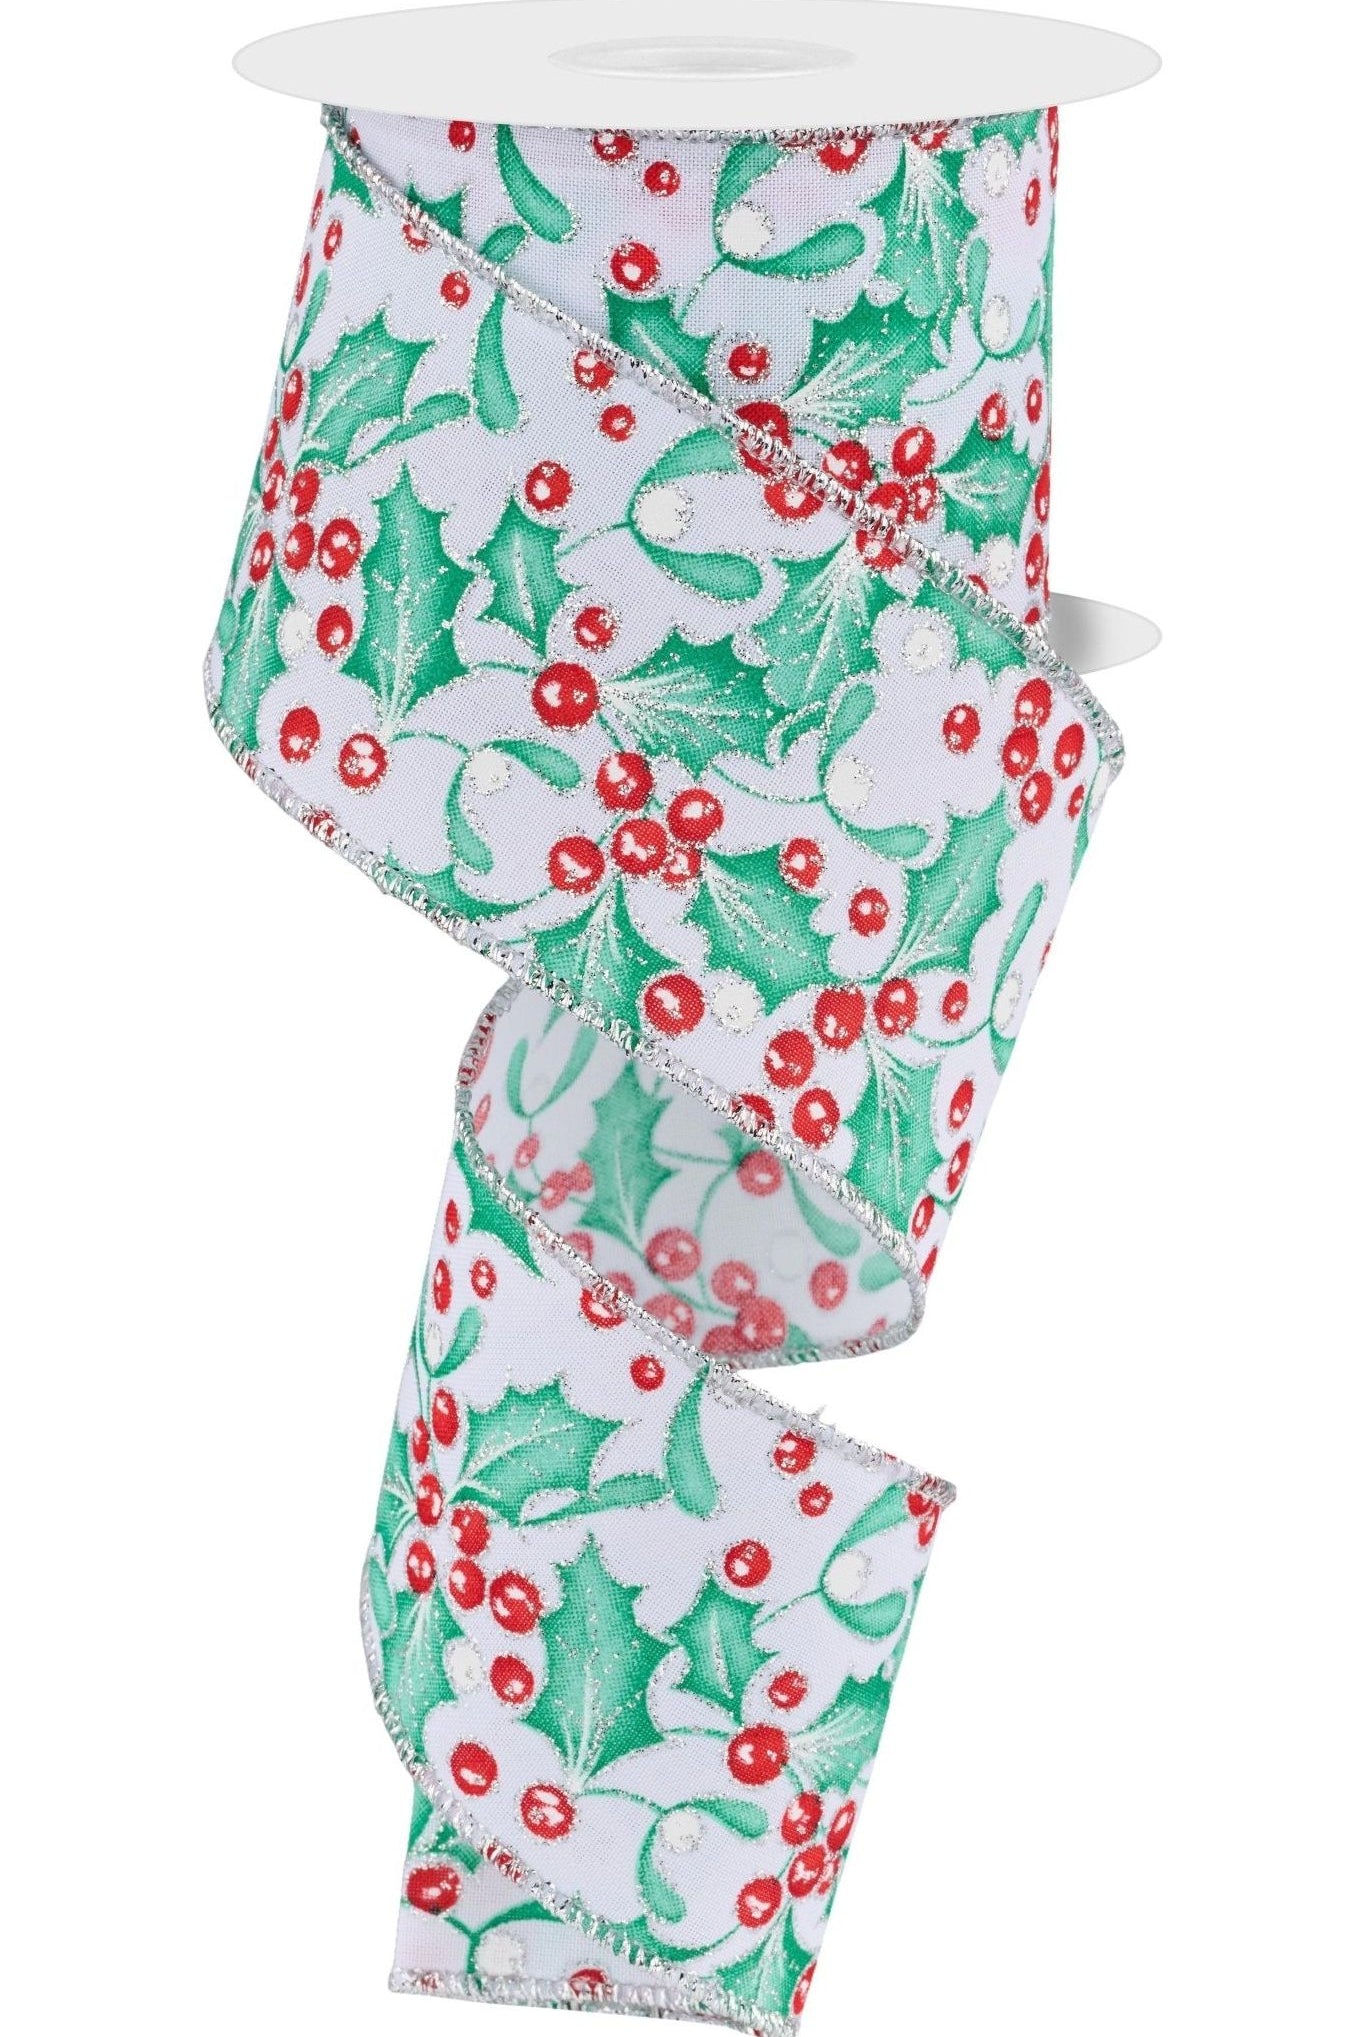 Shop For 2.5" Holly Berry Mistletoe Ribbon: White/Mint (10 Yards) RGF10664W